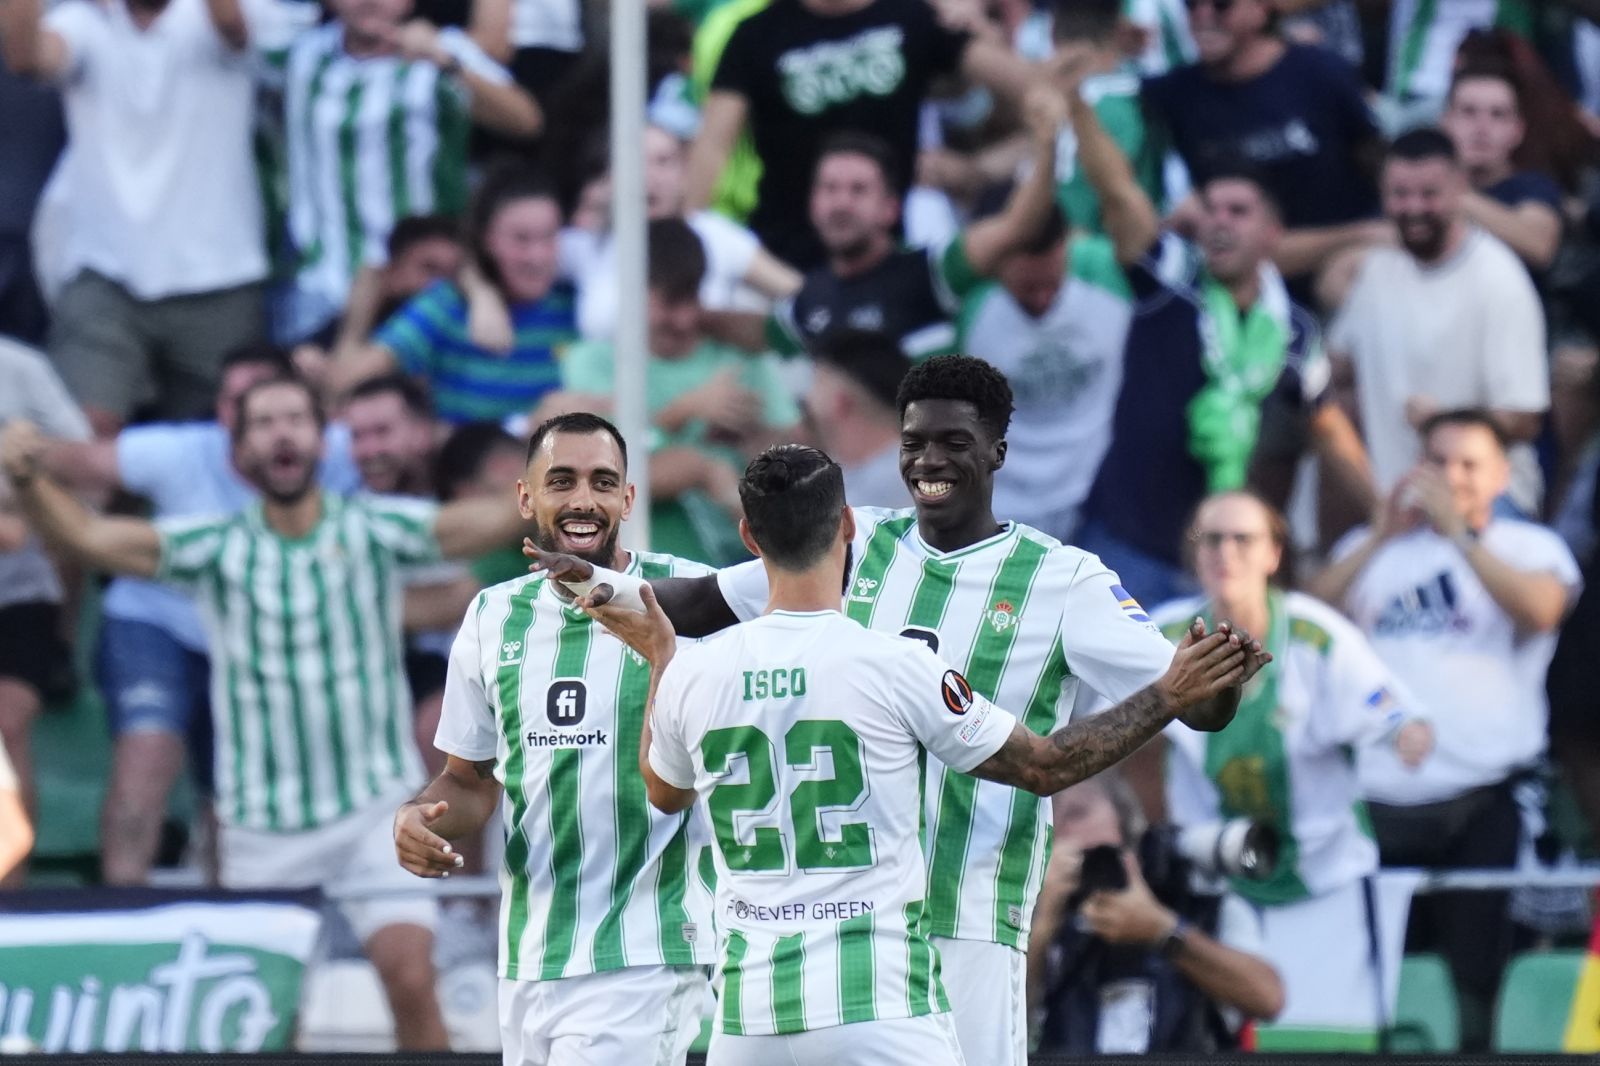 Betis' Assane Diao, right, celebrates after scoring his side's first goal during the Europa League Group C soccer match between Betis and Sparta Prague at the Benito Villamarin Stadium stadium in Seville, Spain, Thursday Oct. 5, 2023. (AP Photo/Jose Breton)